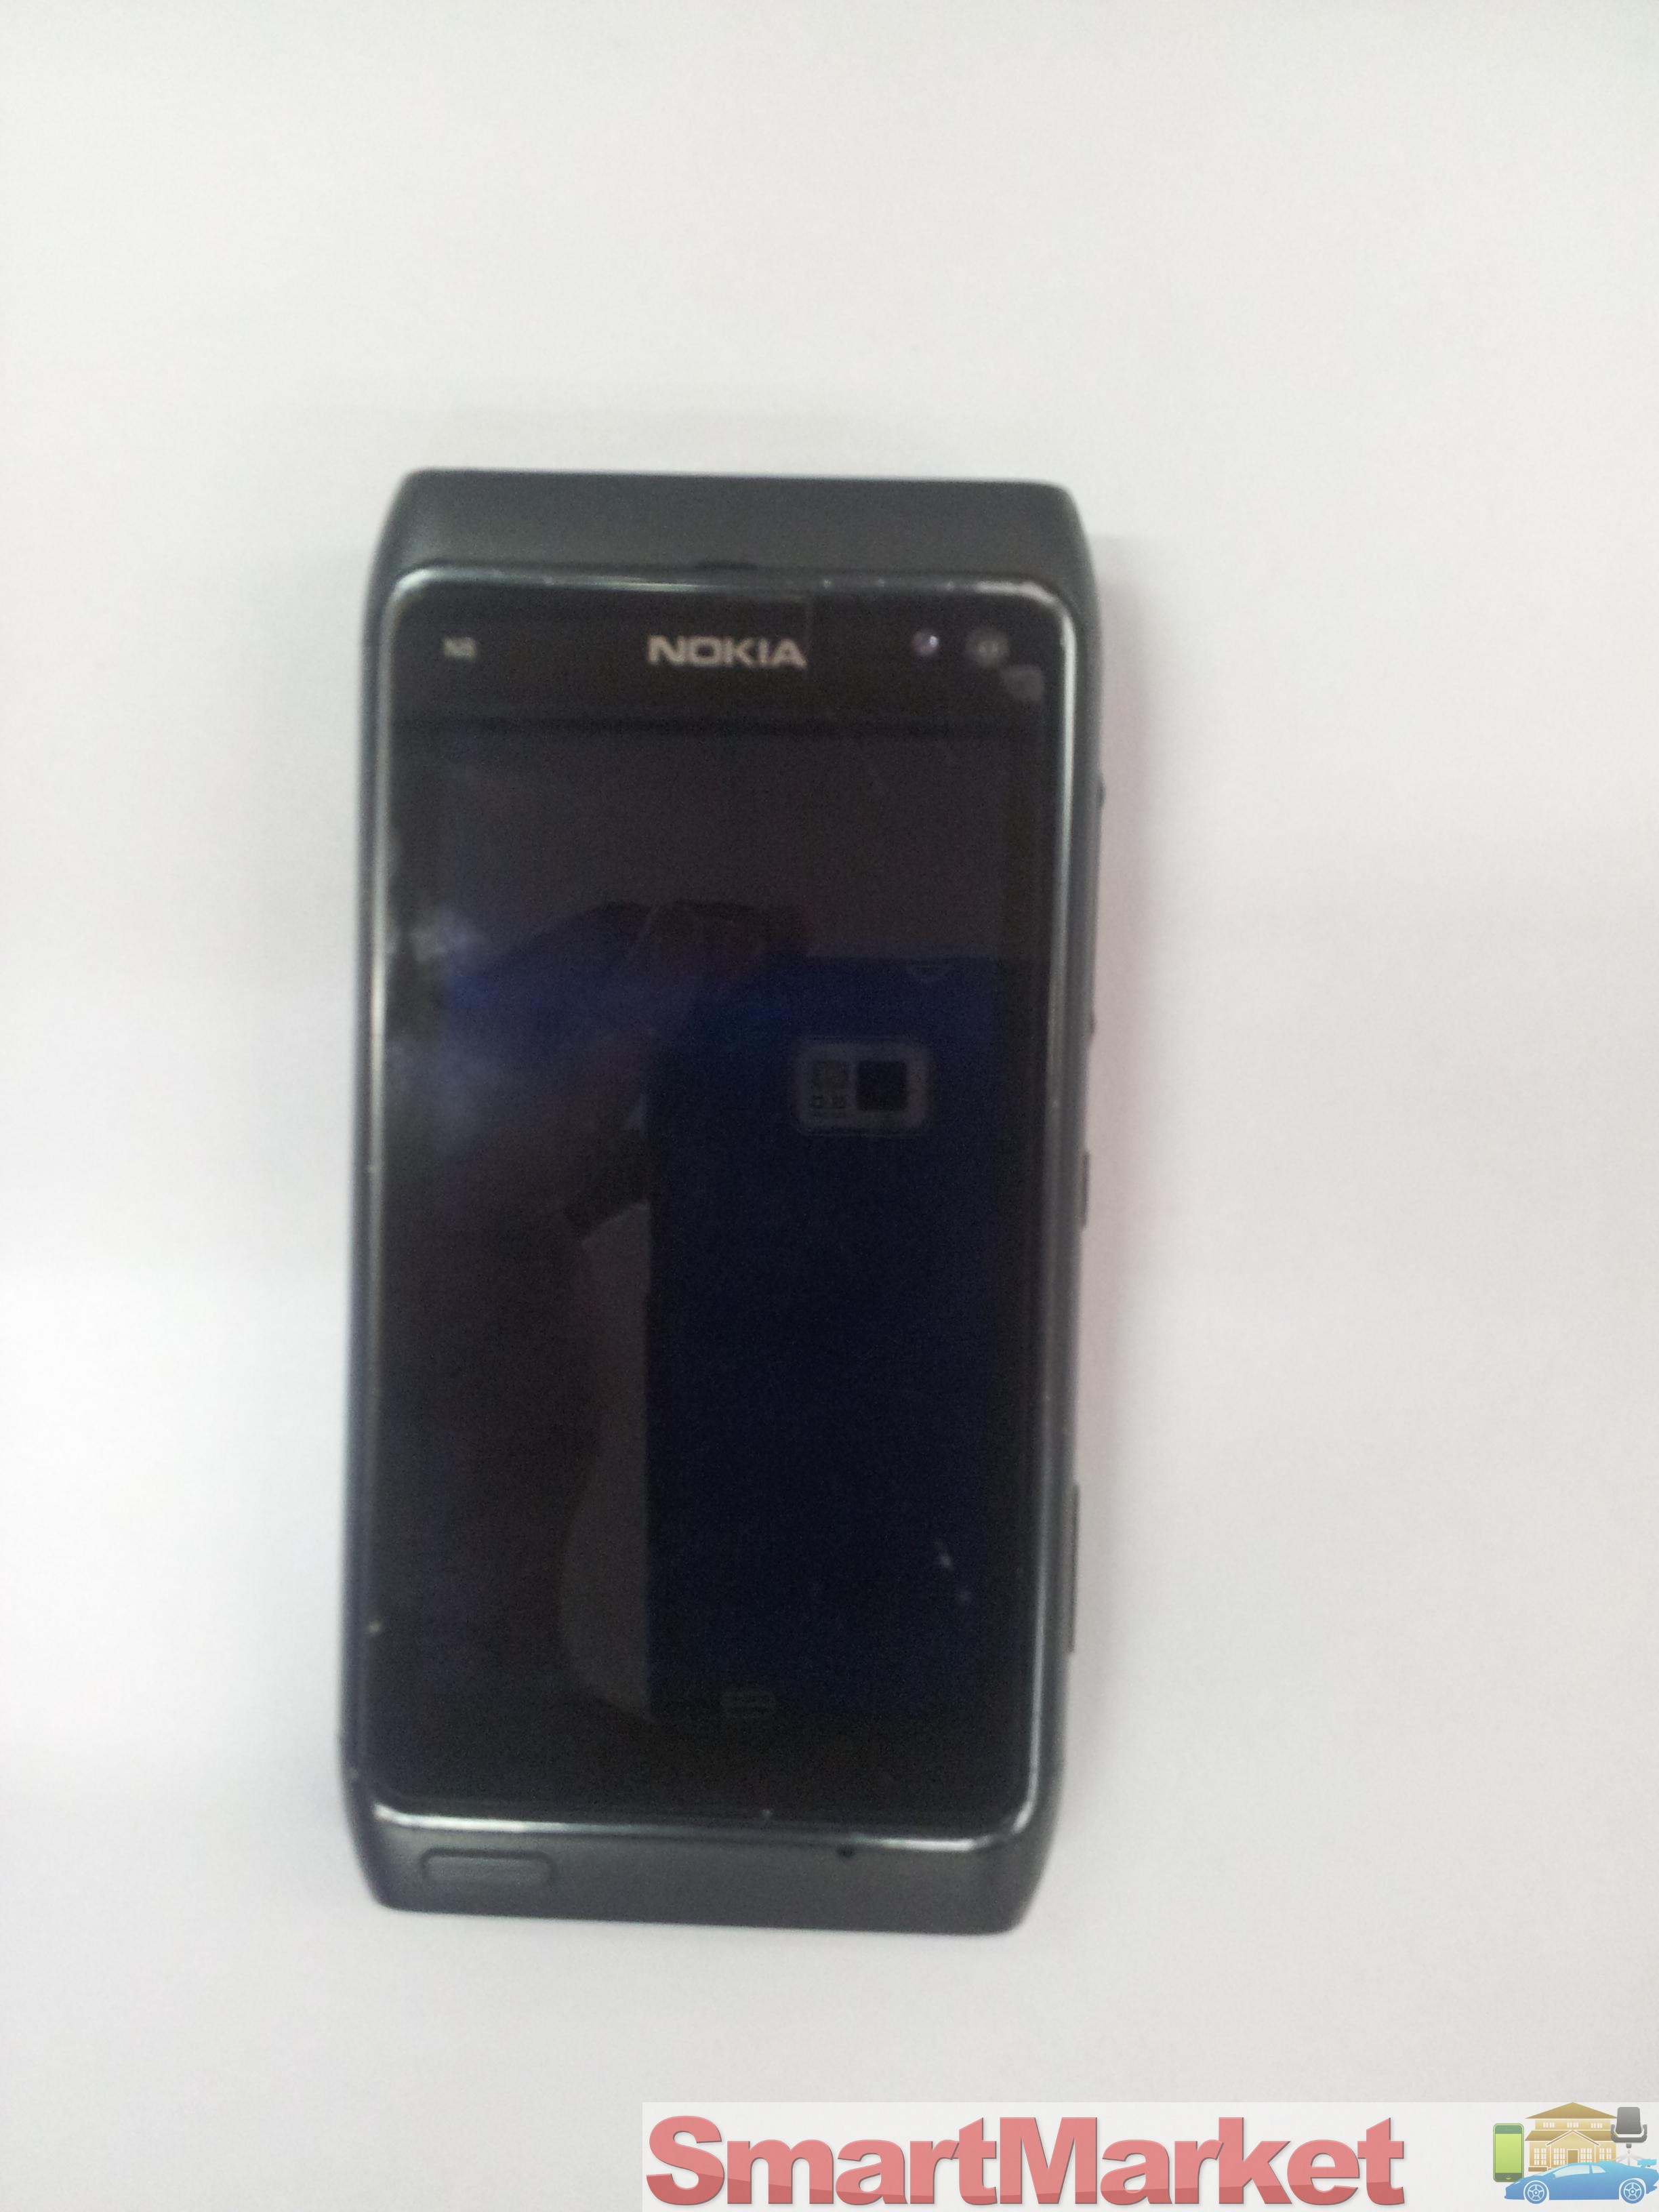 NOKIA N8 Charcoal Black mobile Phone in mint condition.